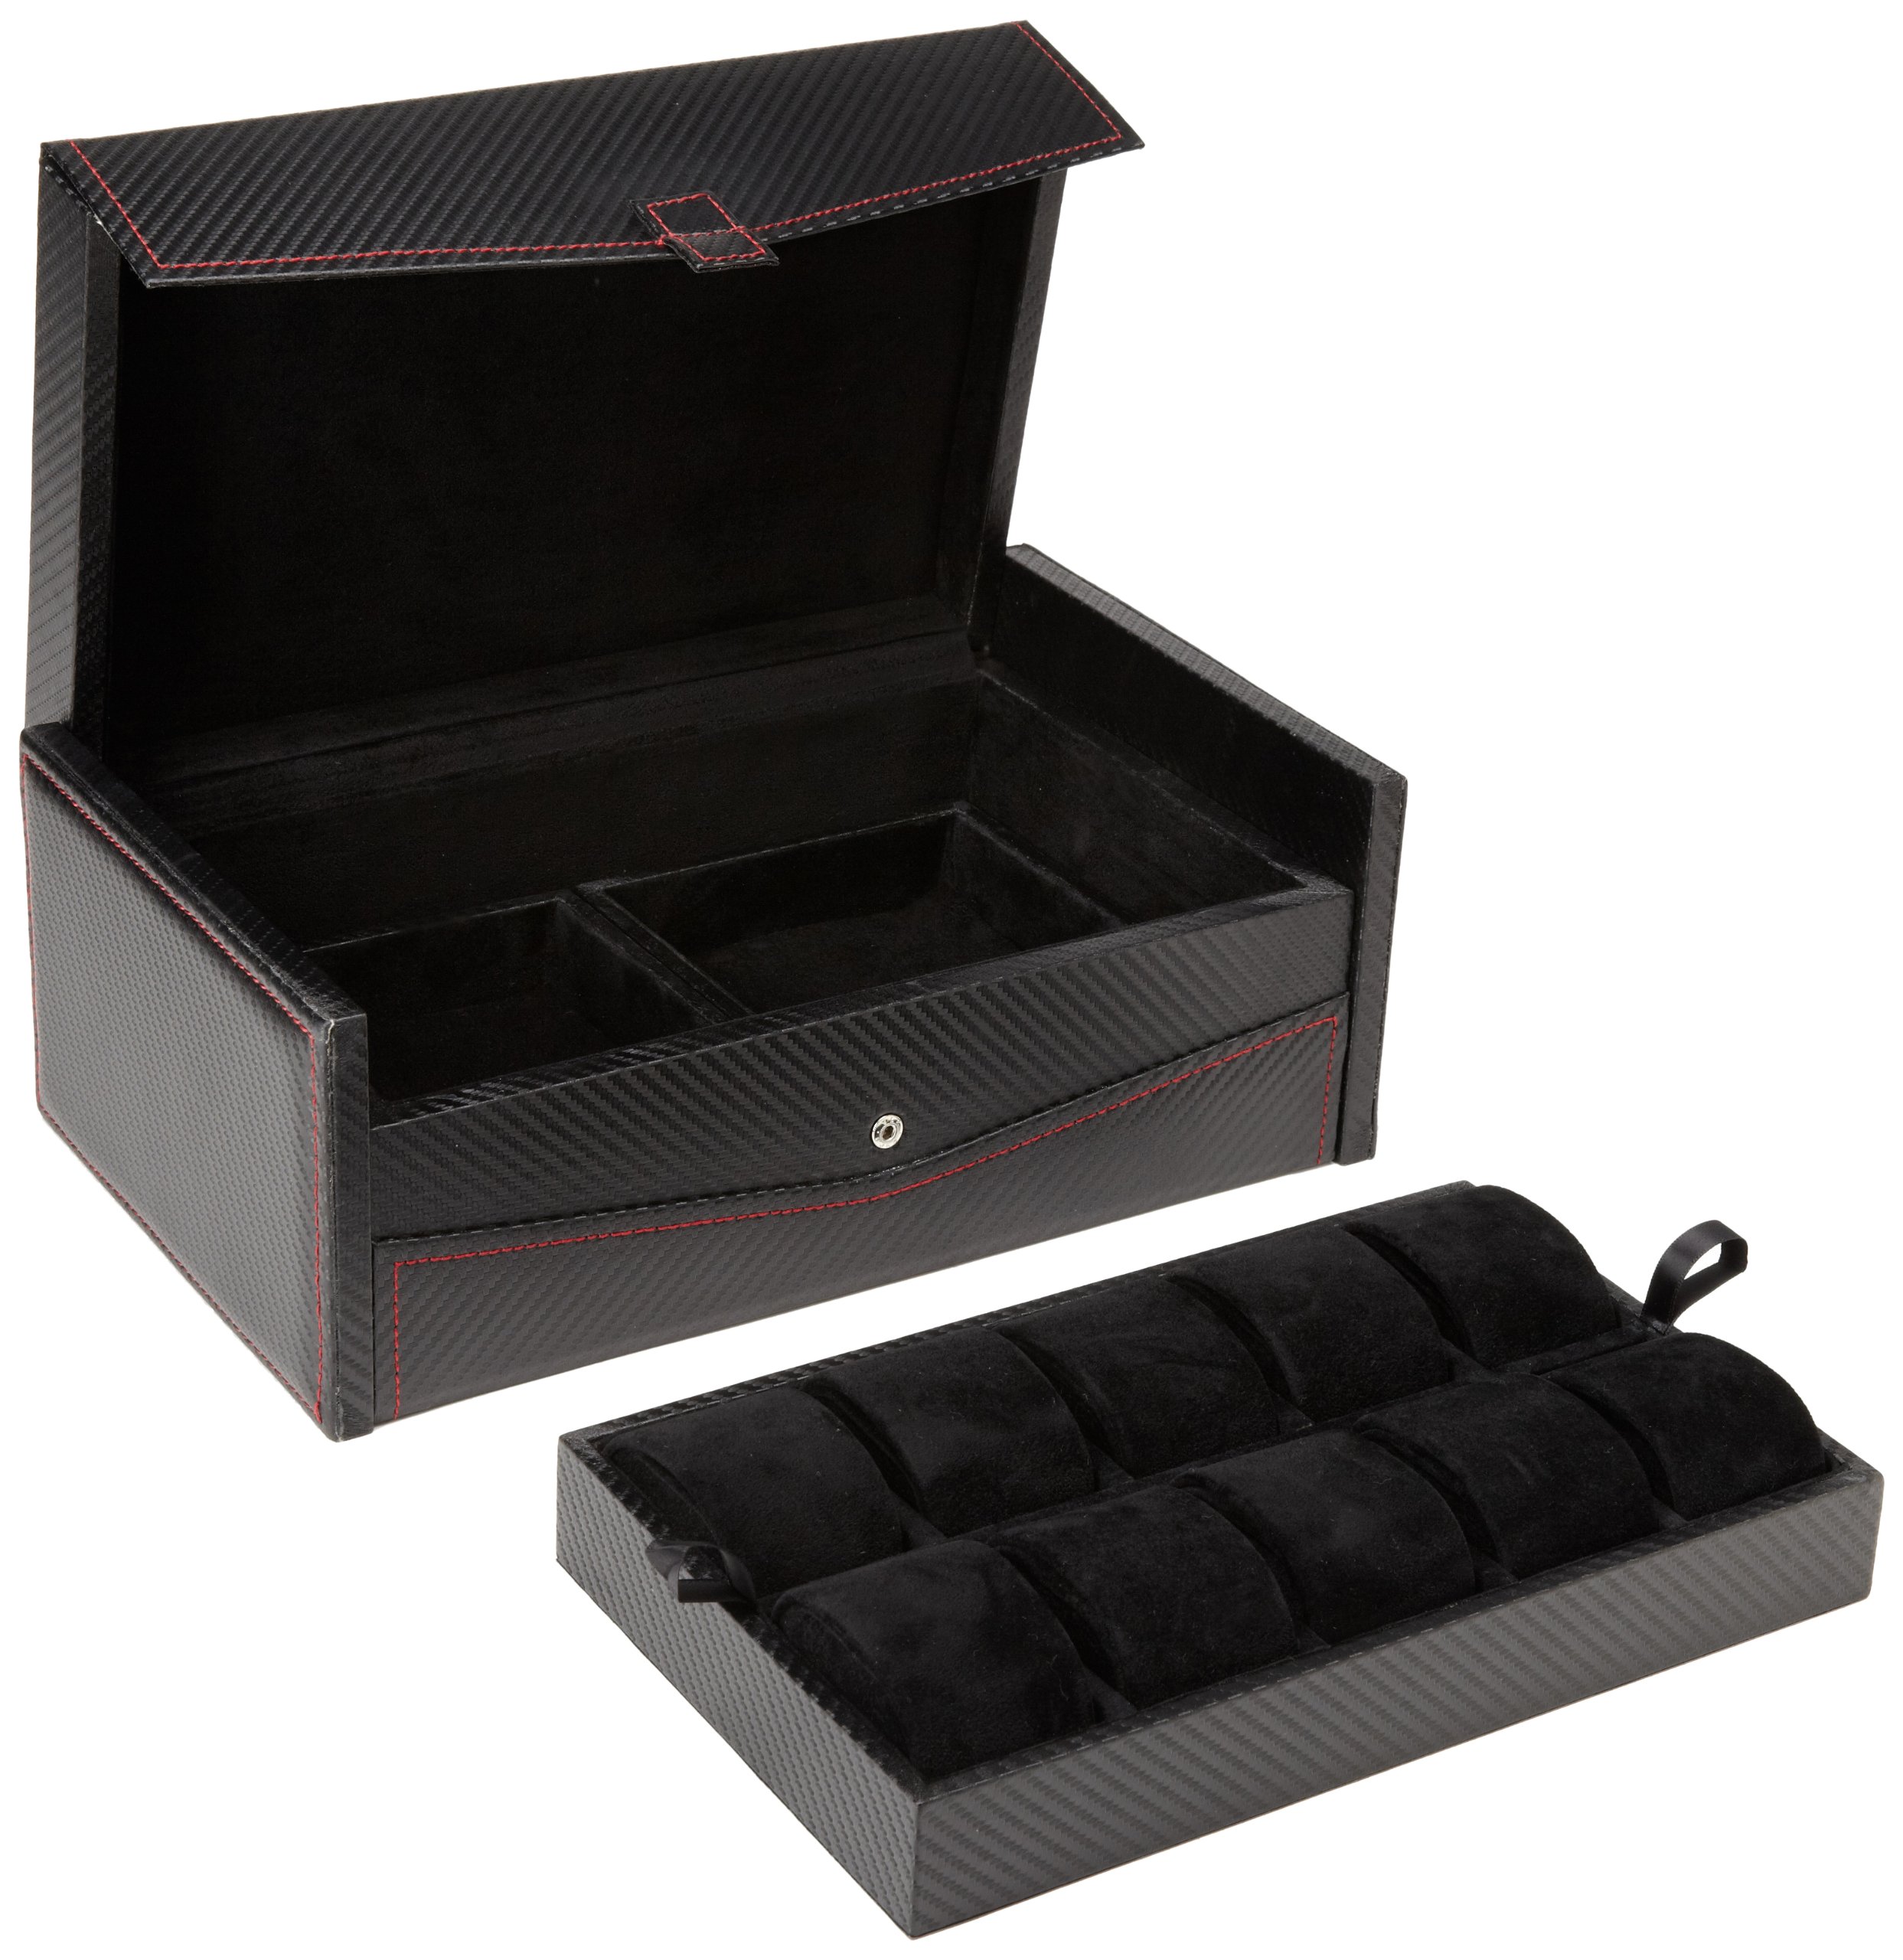 Diplomat 31-444 Carbon Fiber Ten Watch Case with Black Suede Interior and 2 Storage Compartments Watch Case